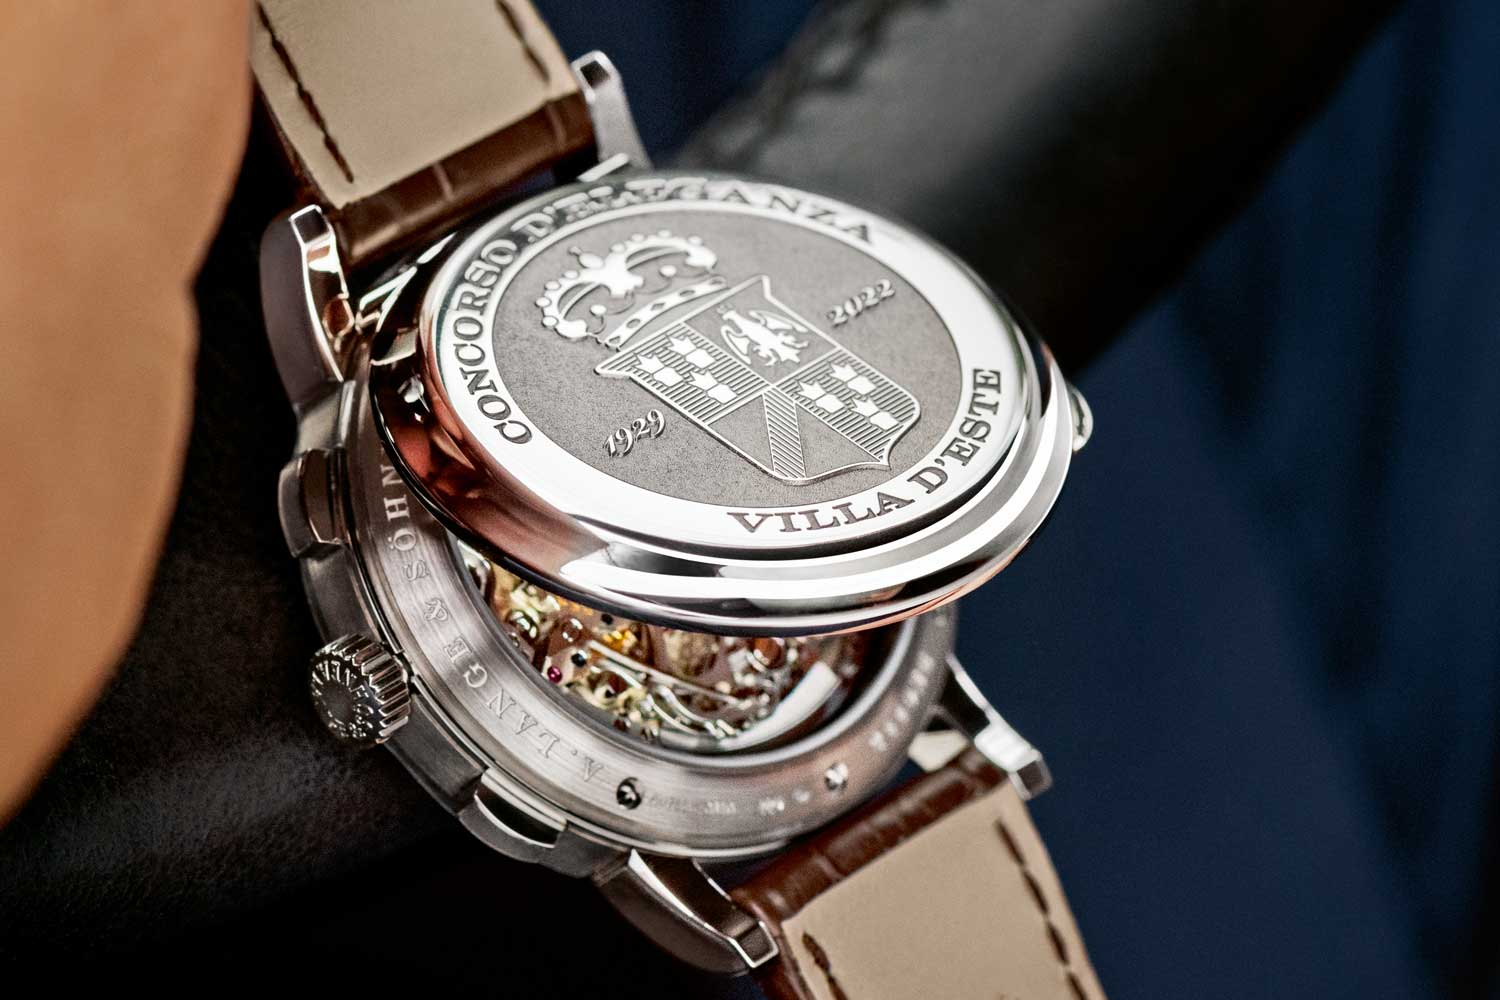 Hinged caseback is hand-engraved with the Concorso coat of arms and the year